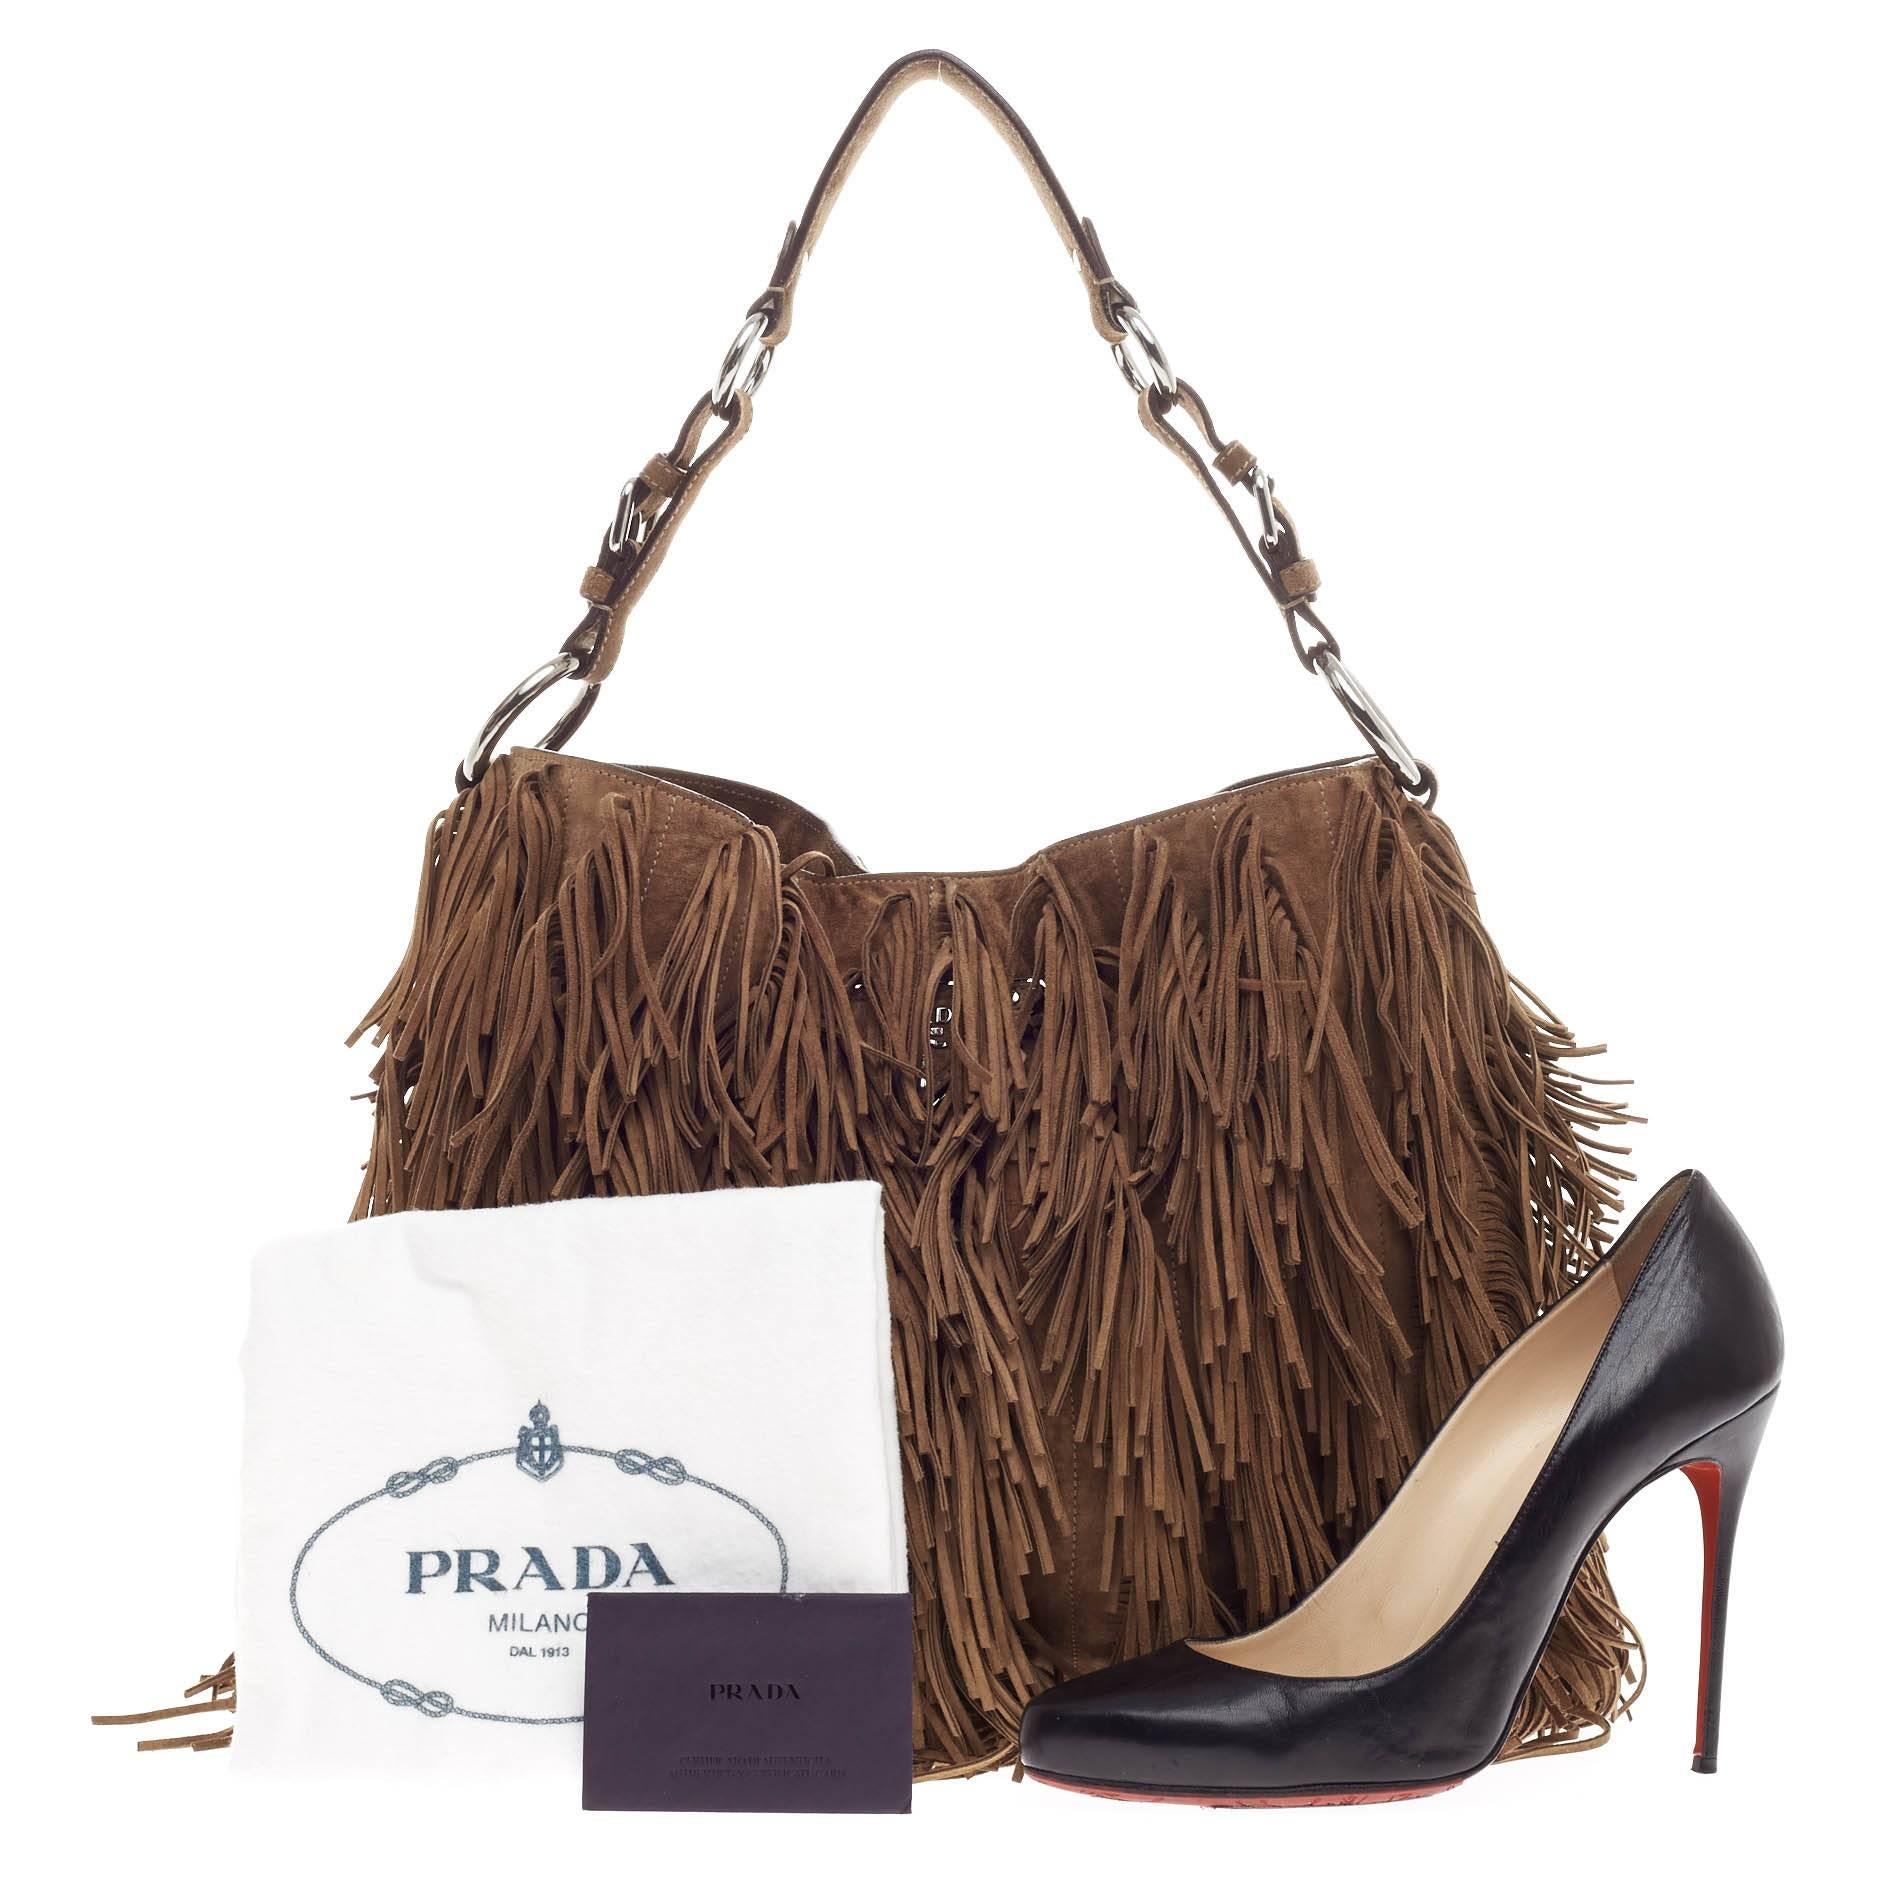 This authentic Prada Fringe Hobo Suede Medium is showcases Prada's unique and eye-catching fashion forward style. Constructed in brown suede, this 70's inspired hobo features all-over cascading long fringe details, a single belted strap with